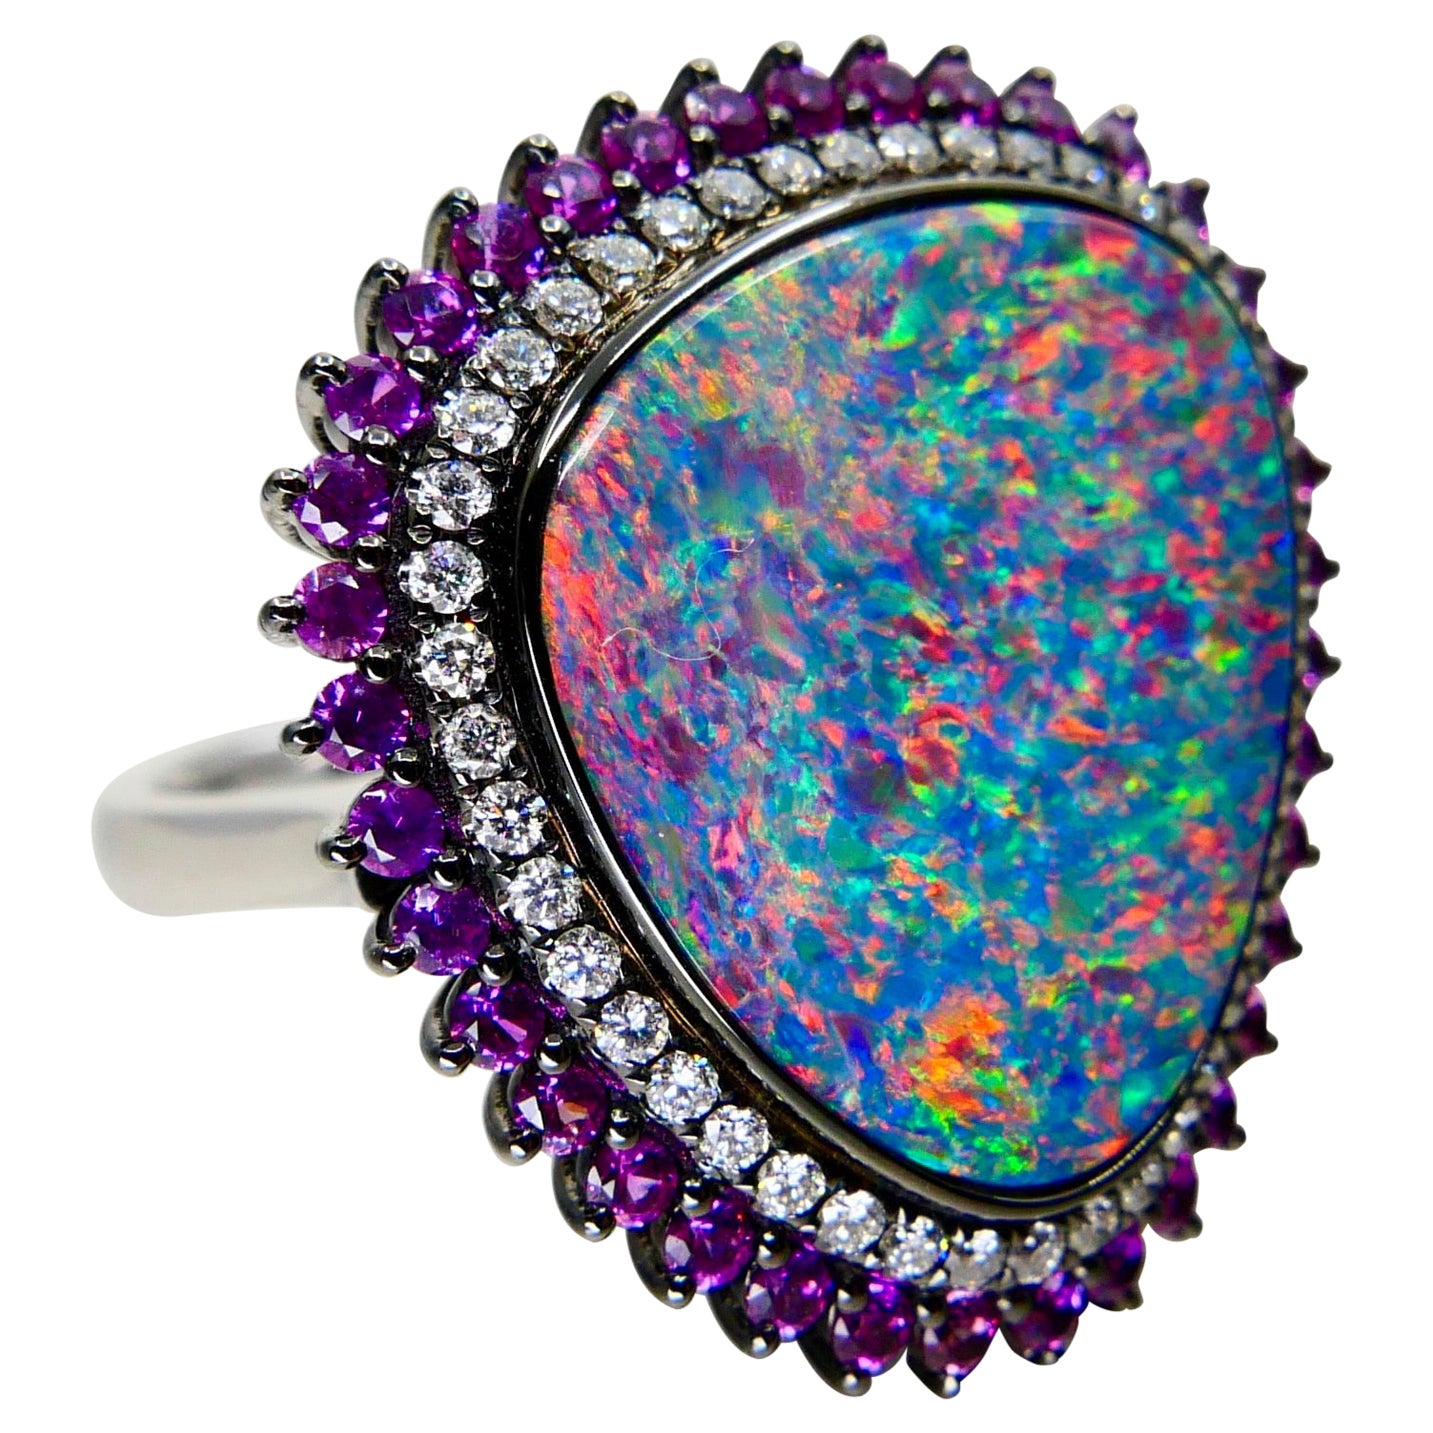 7.84 Cts Au Opal, Pink Sapphire & Diamond Ring Pendant, Superb Play of Colors For Sale